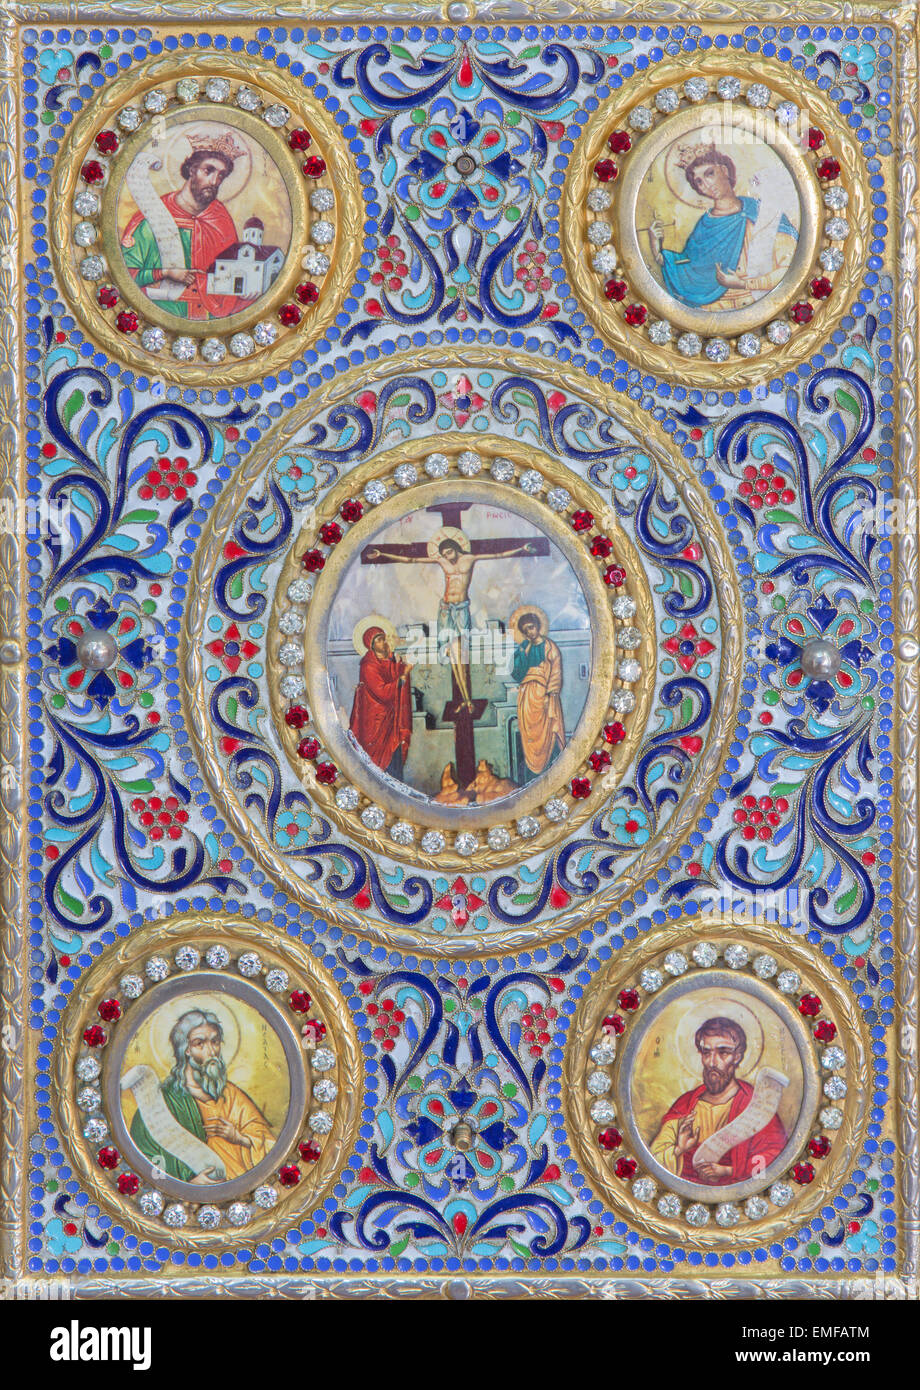 BETHLEHEM, ISRAEL - MARCH 6, 2015: The detail of the binding of liturgical book from 19. cent. in Syrian orthodox church. Stock Photo